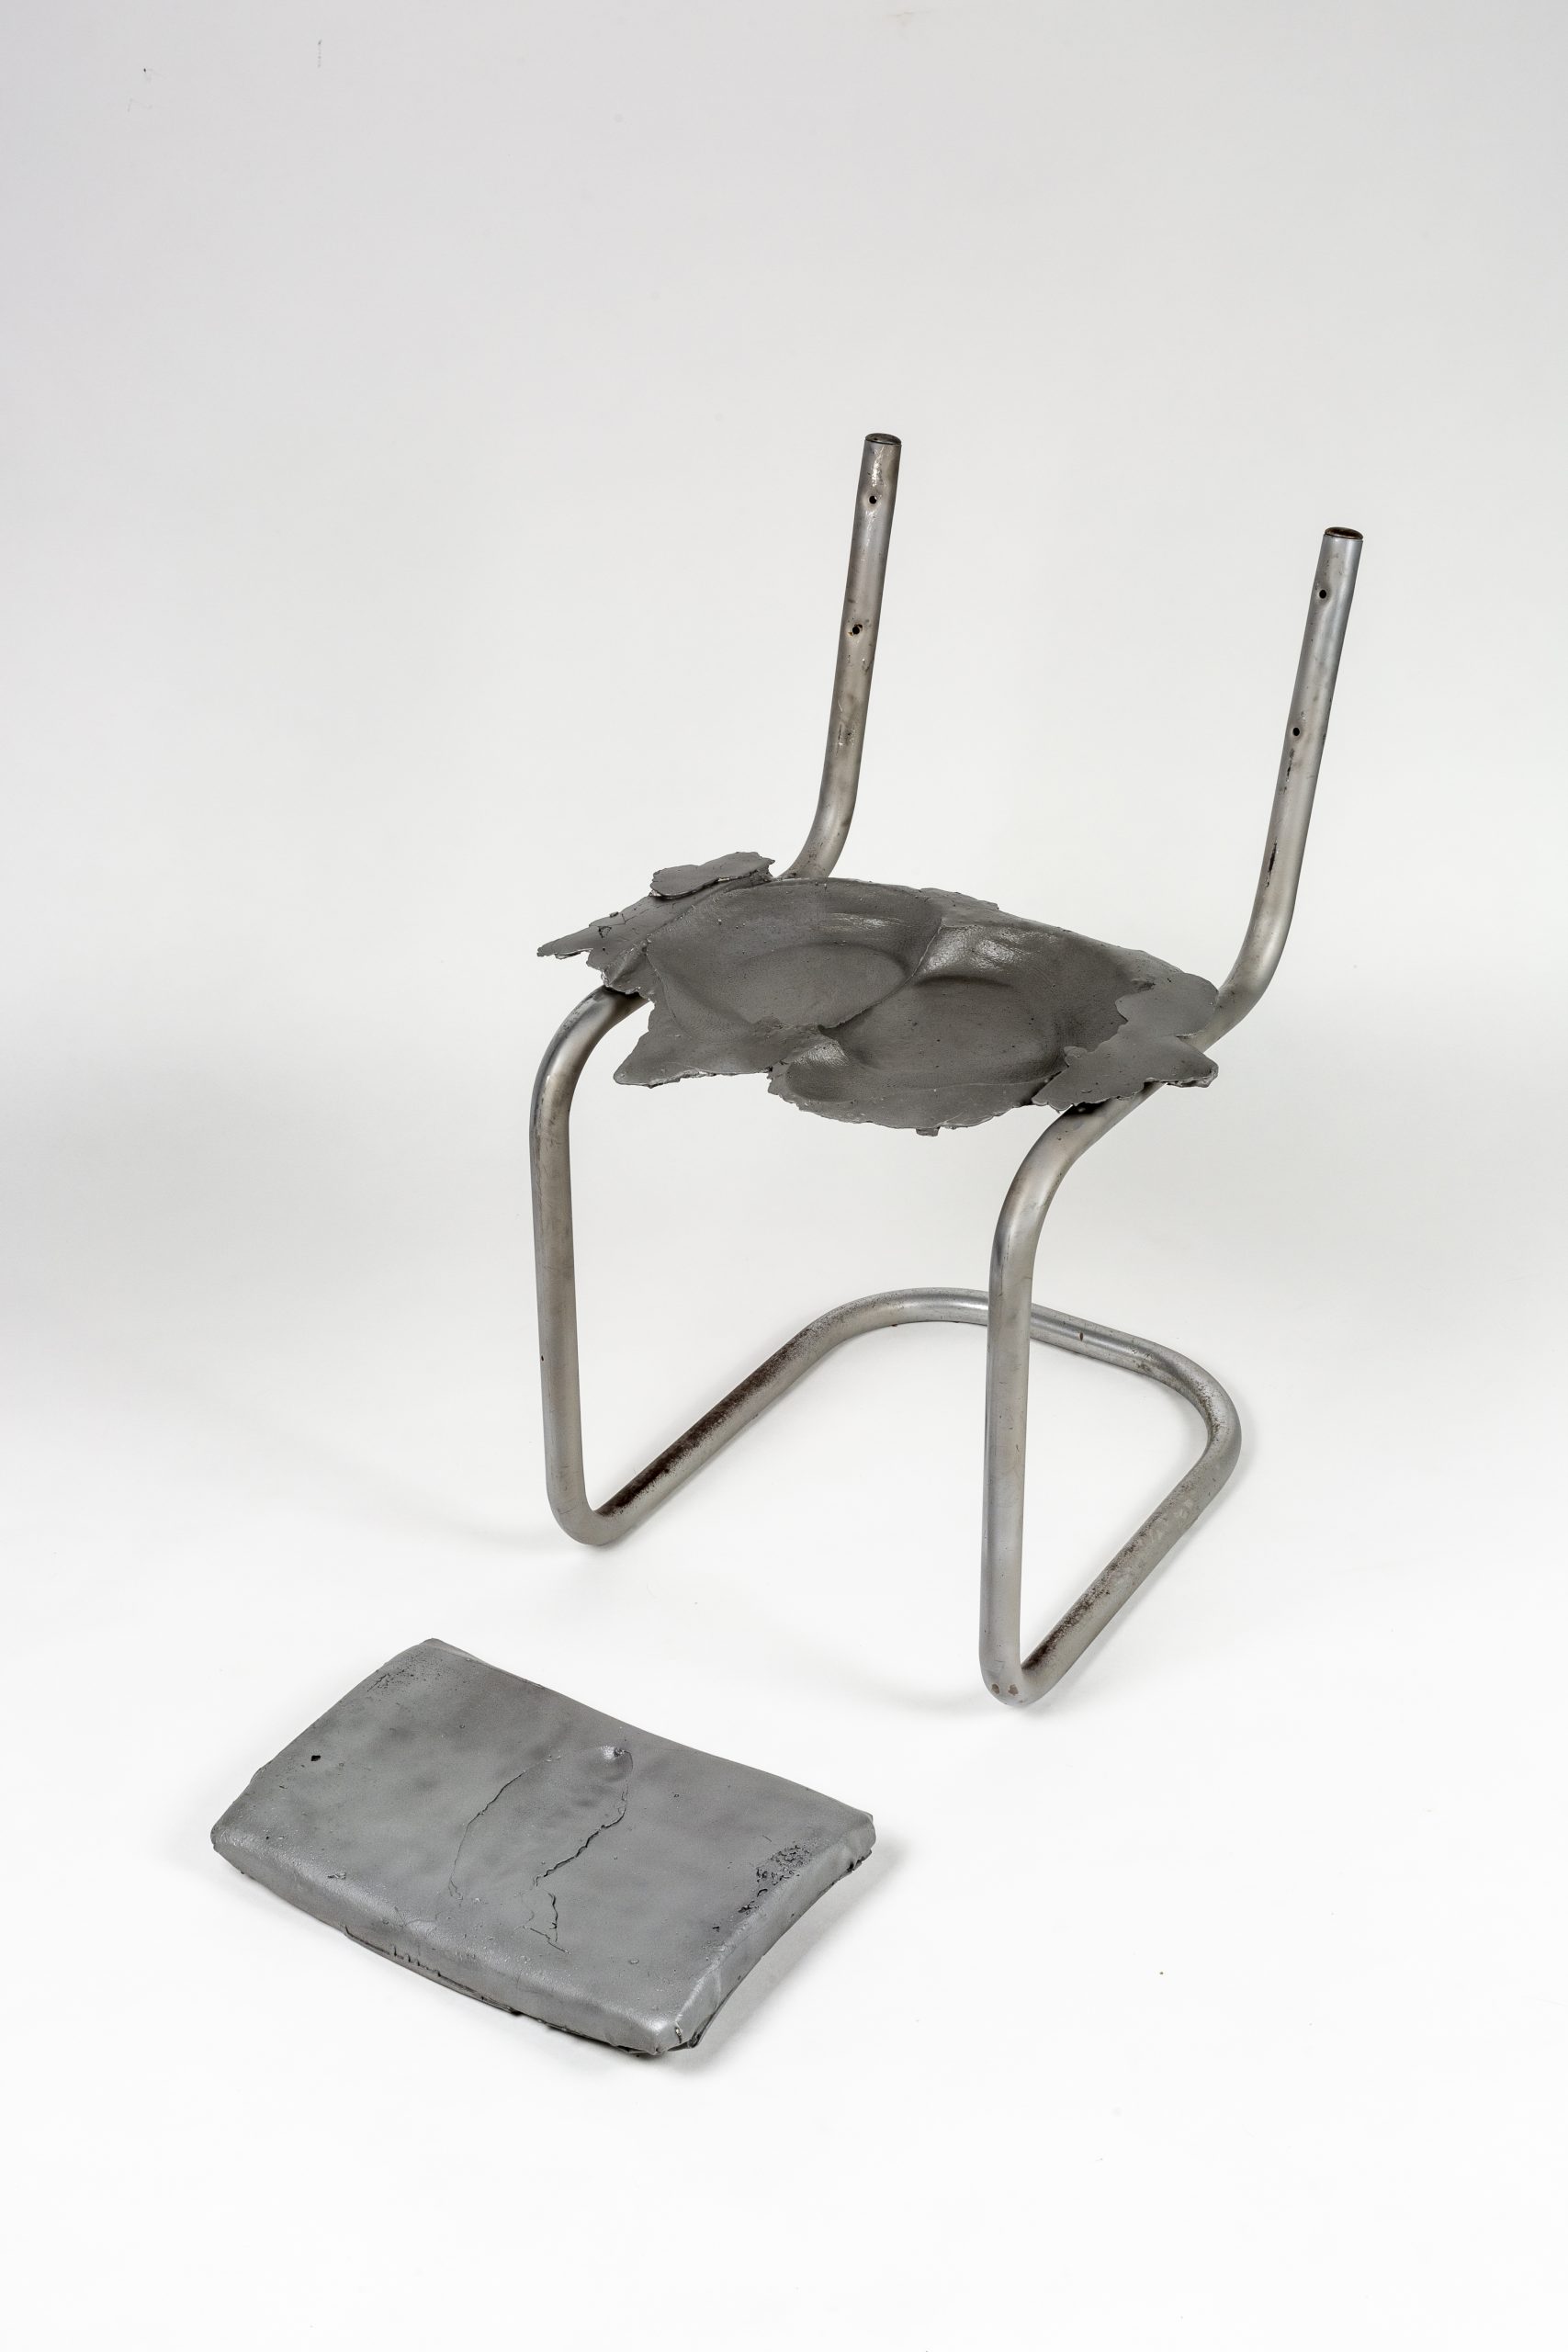 Tubular steel chair frame with an impression in the seat and a clay piece with an impression on the ground in front of it.